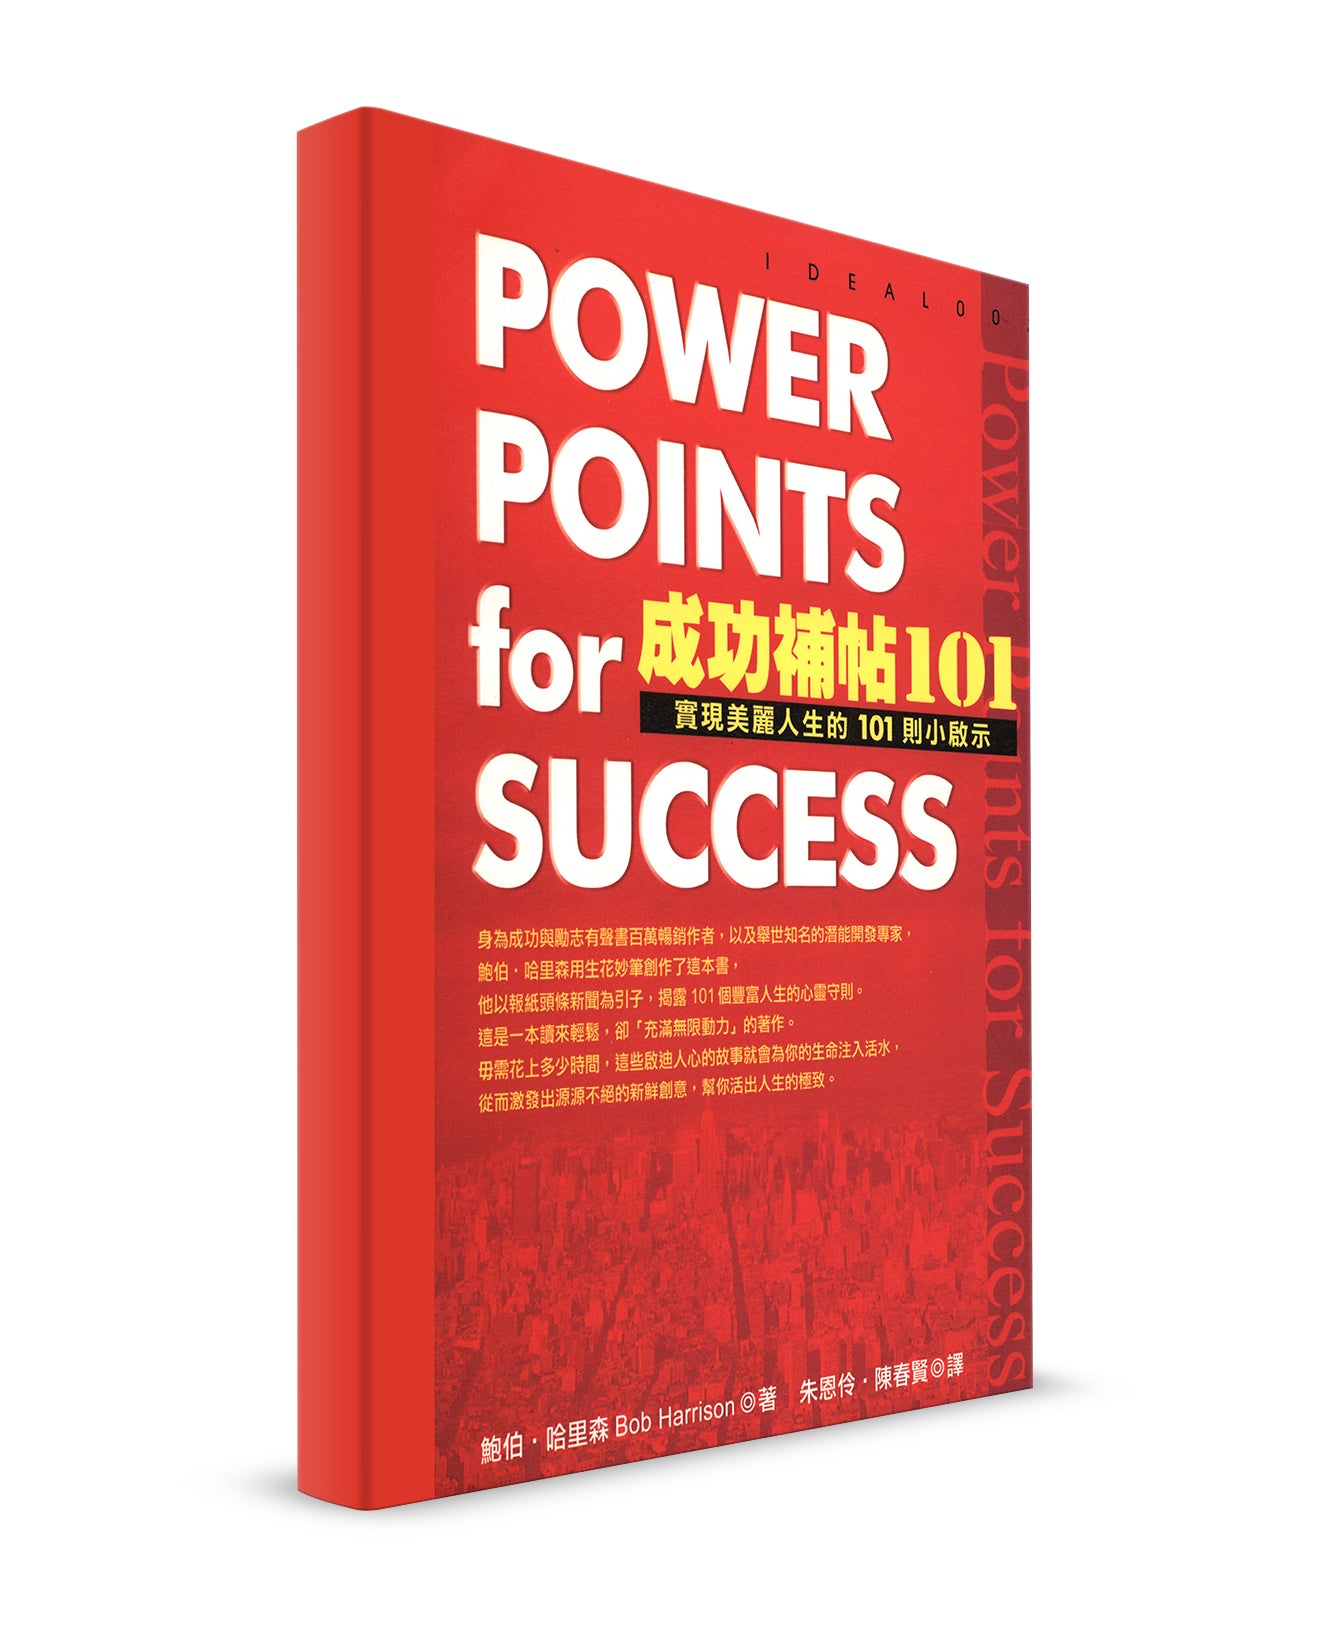 Power Points for Increase (Chinese)